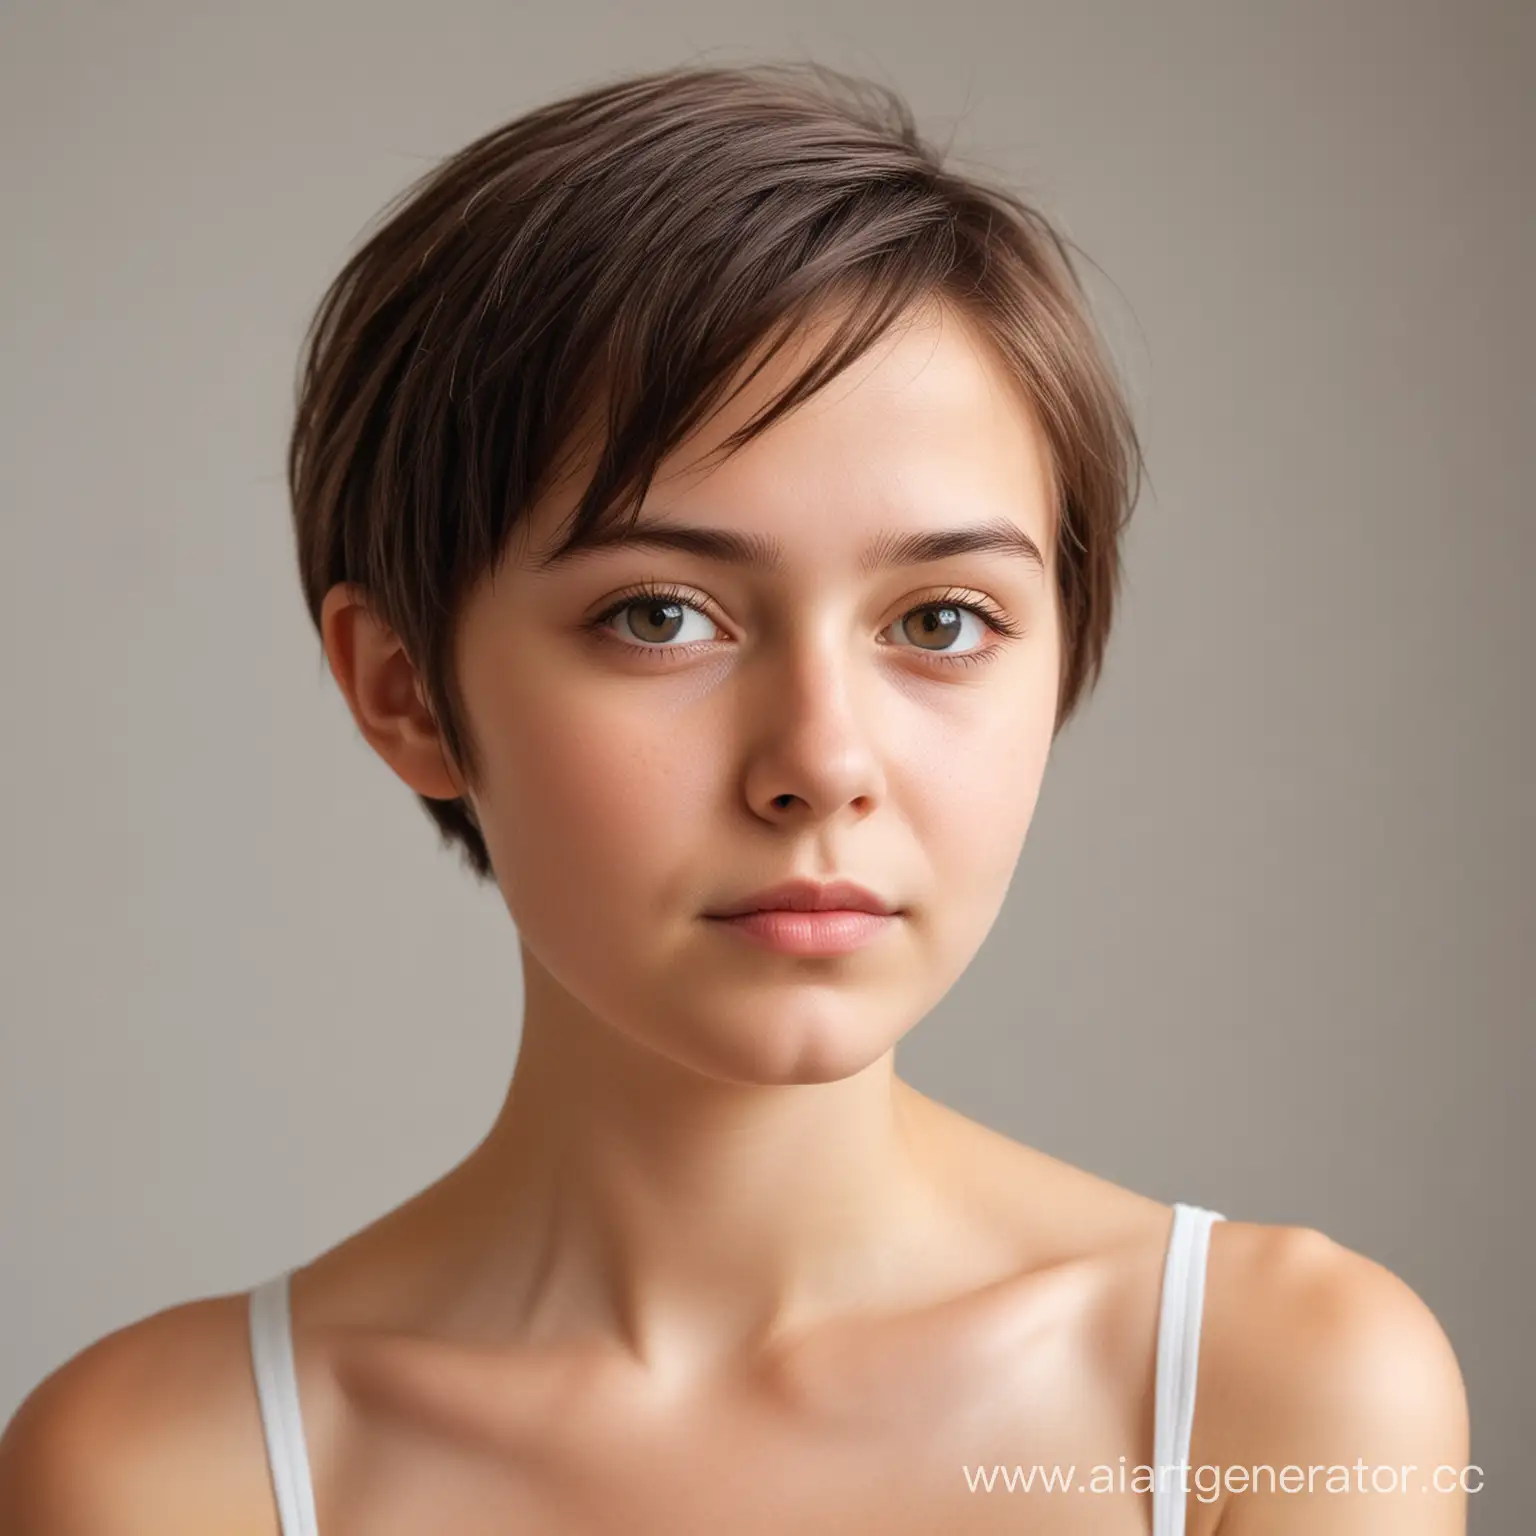 Contemplative-Young-Girl-with-Short-Hair-on-Light-Background